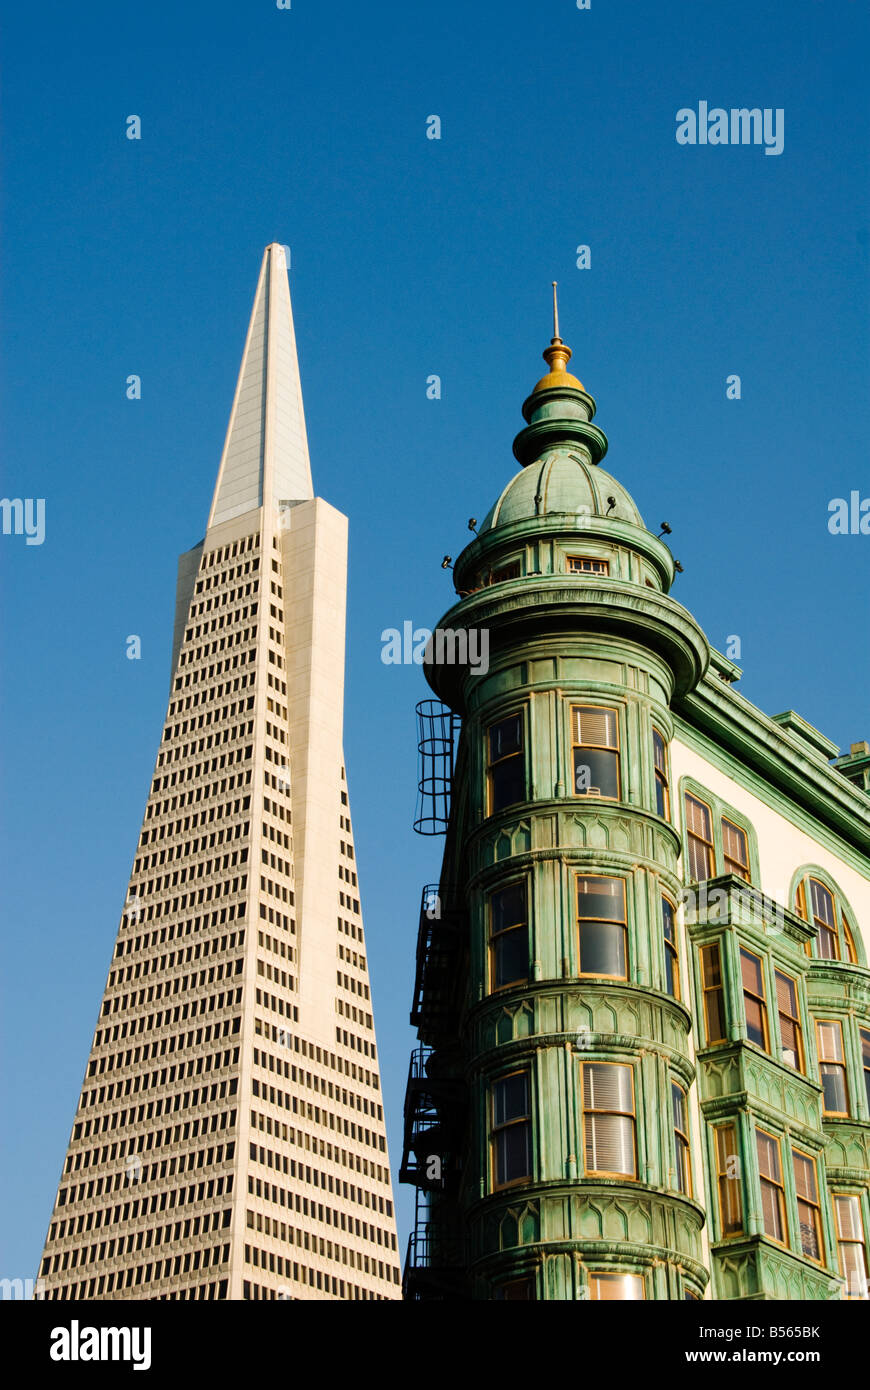 California San Francisco Old and new architecture Zoetrope Building and Transamerica Pyramid as seen from North Beach. Stock Photo